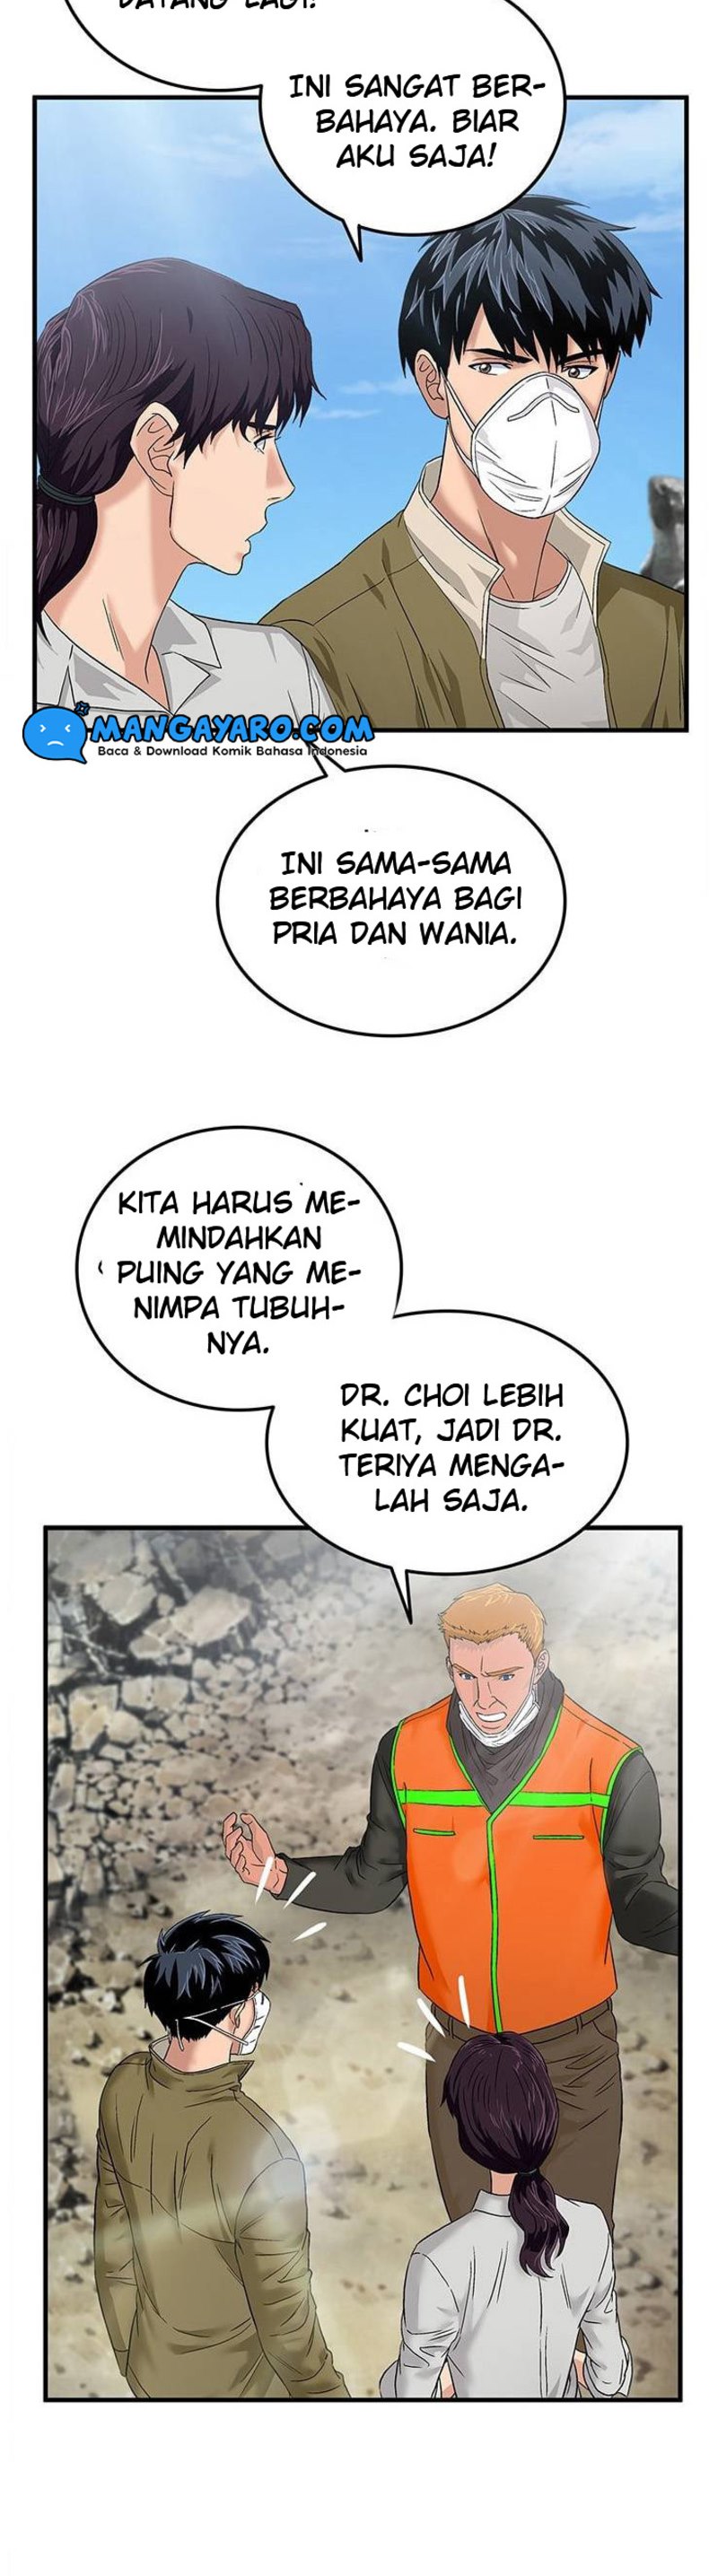 Dr. Choi Tae-Soo Chapter 52